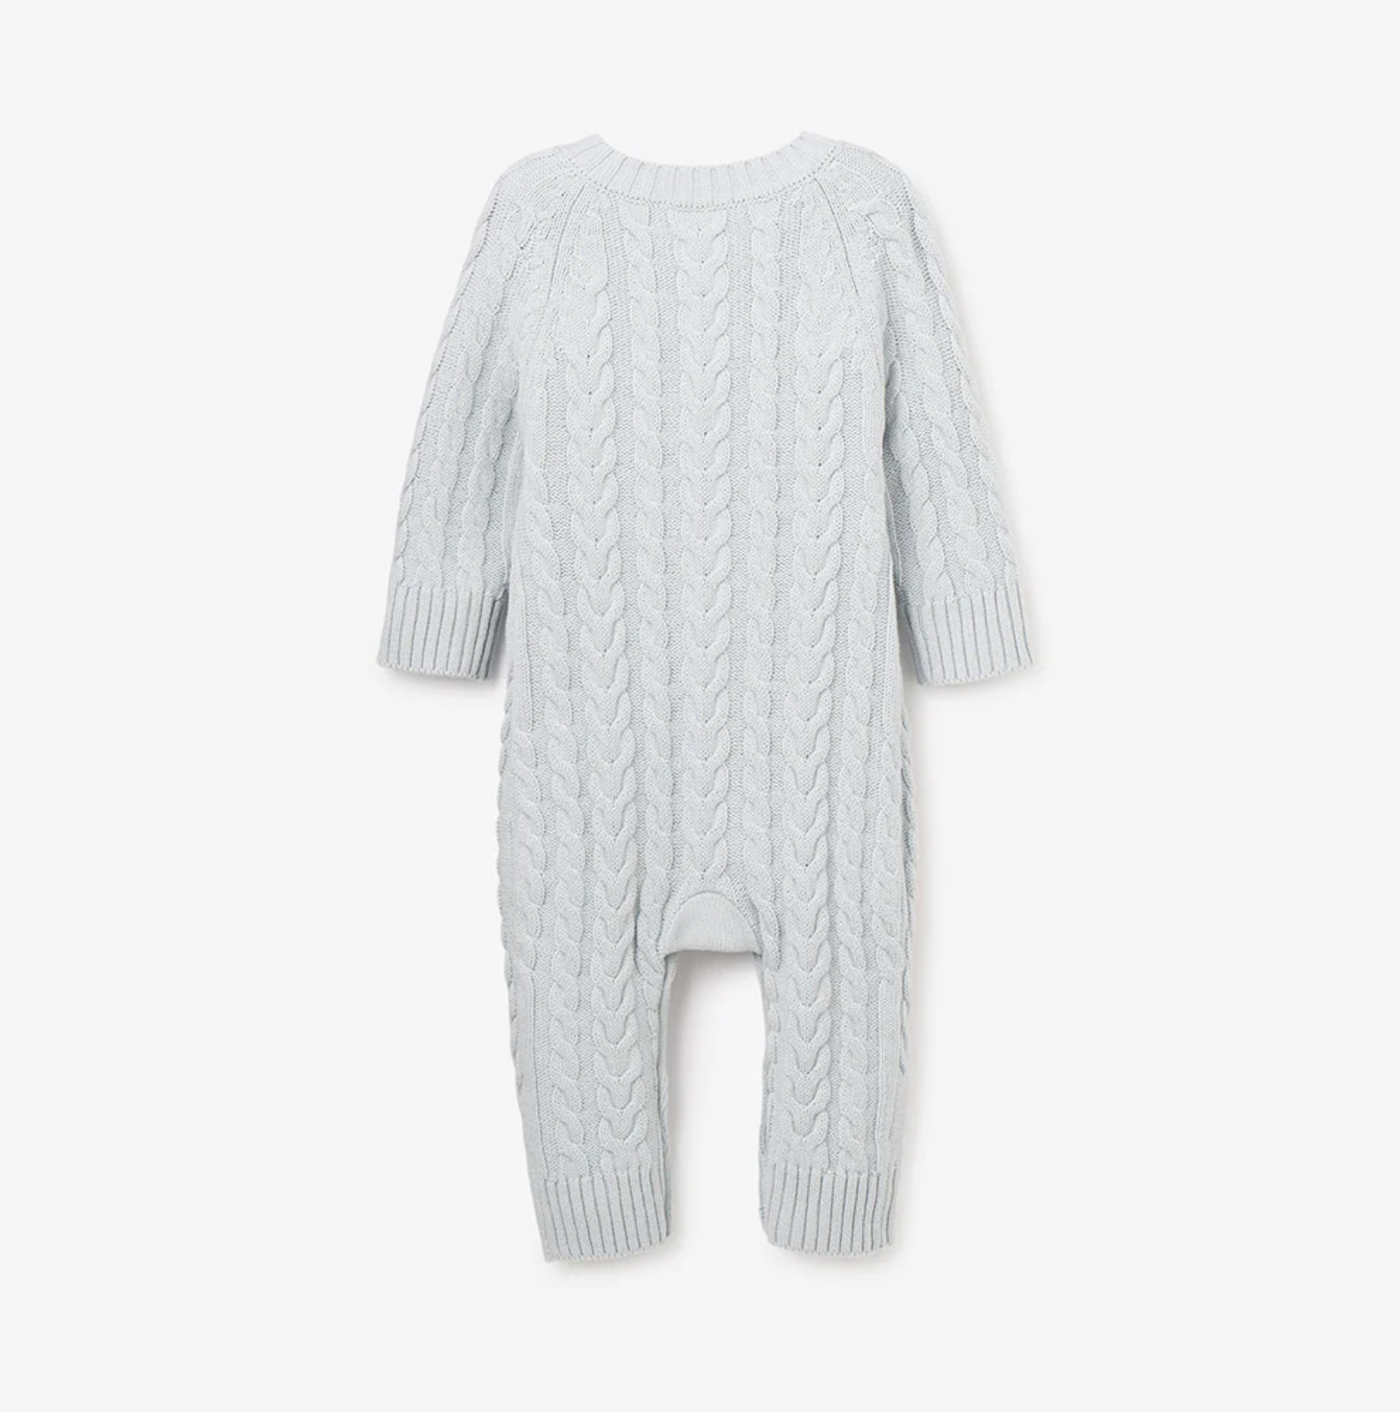 BABY JUMPSUIT PALE BLUE CABLE KNIT (Available in 2 Sizes)